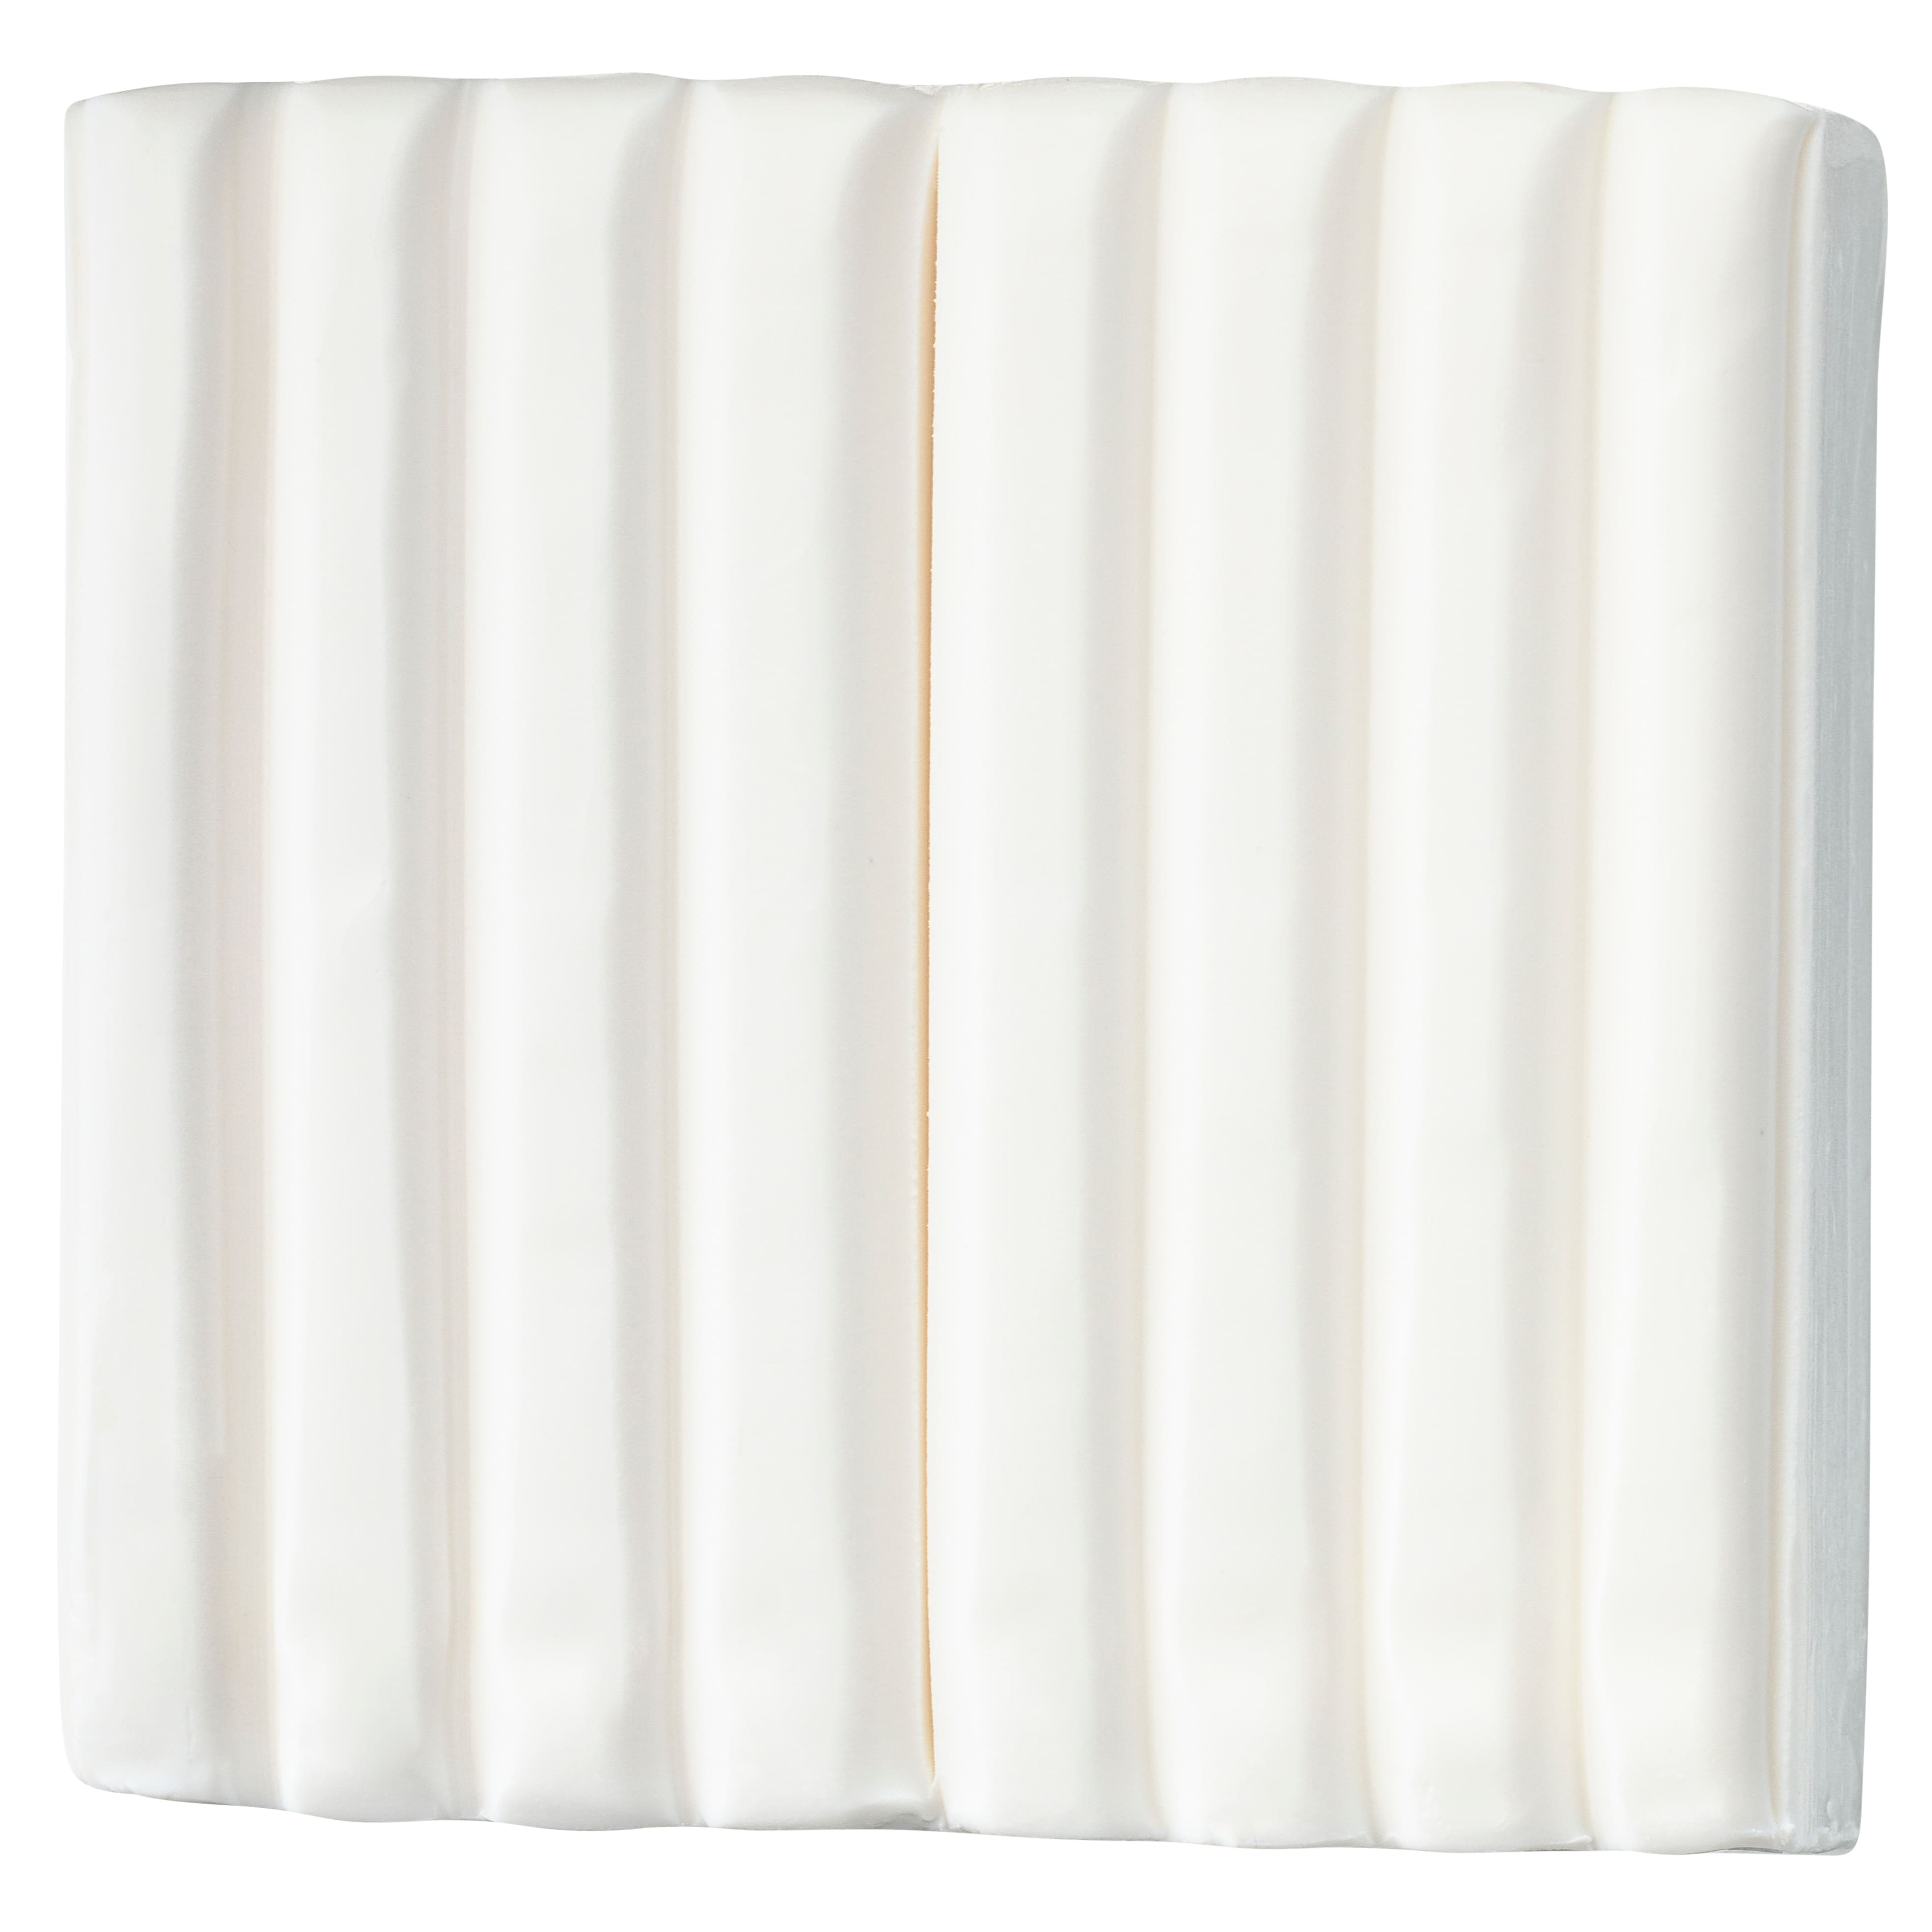 12 Pack: Fimo&#xAE; Classic White Clay